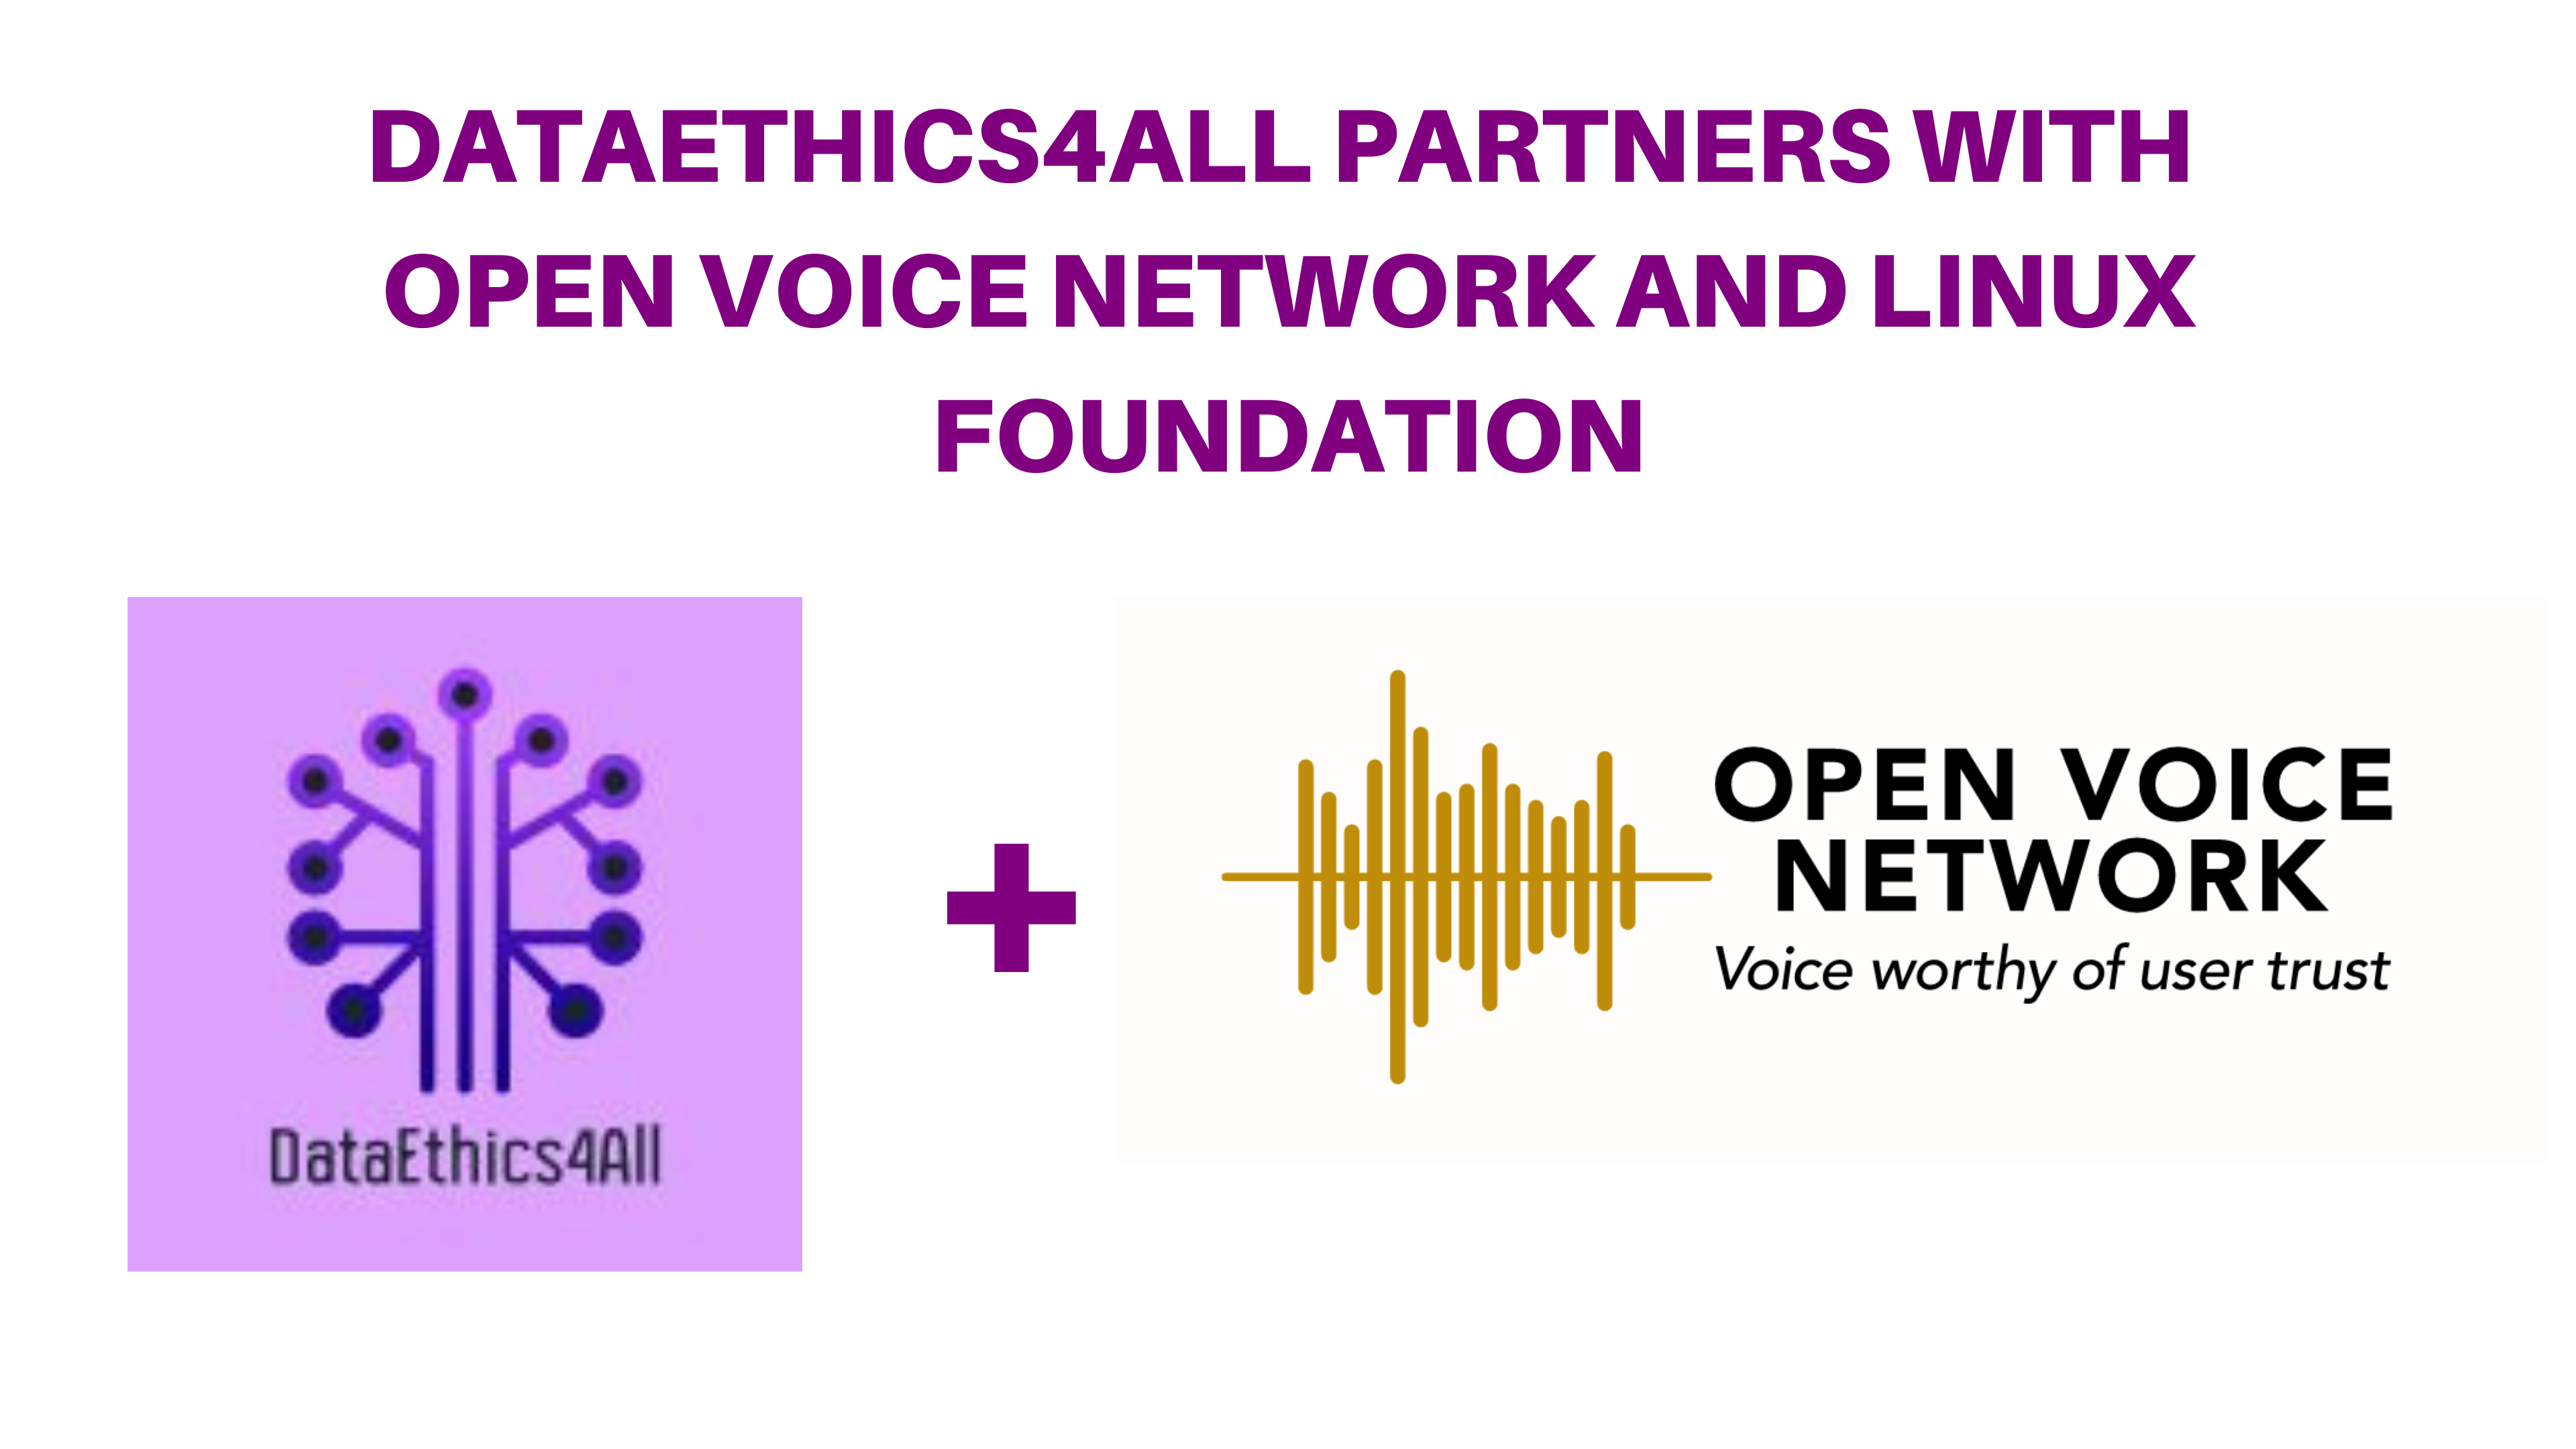 dataethics4all partners with open voice network and linux foundation